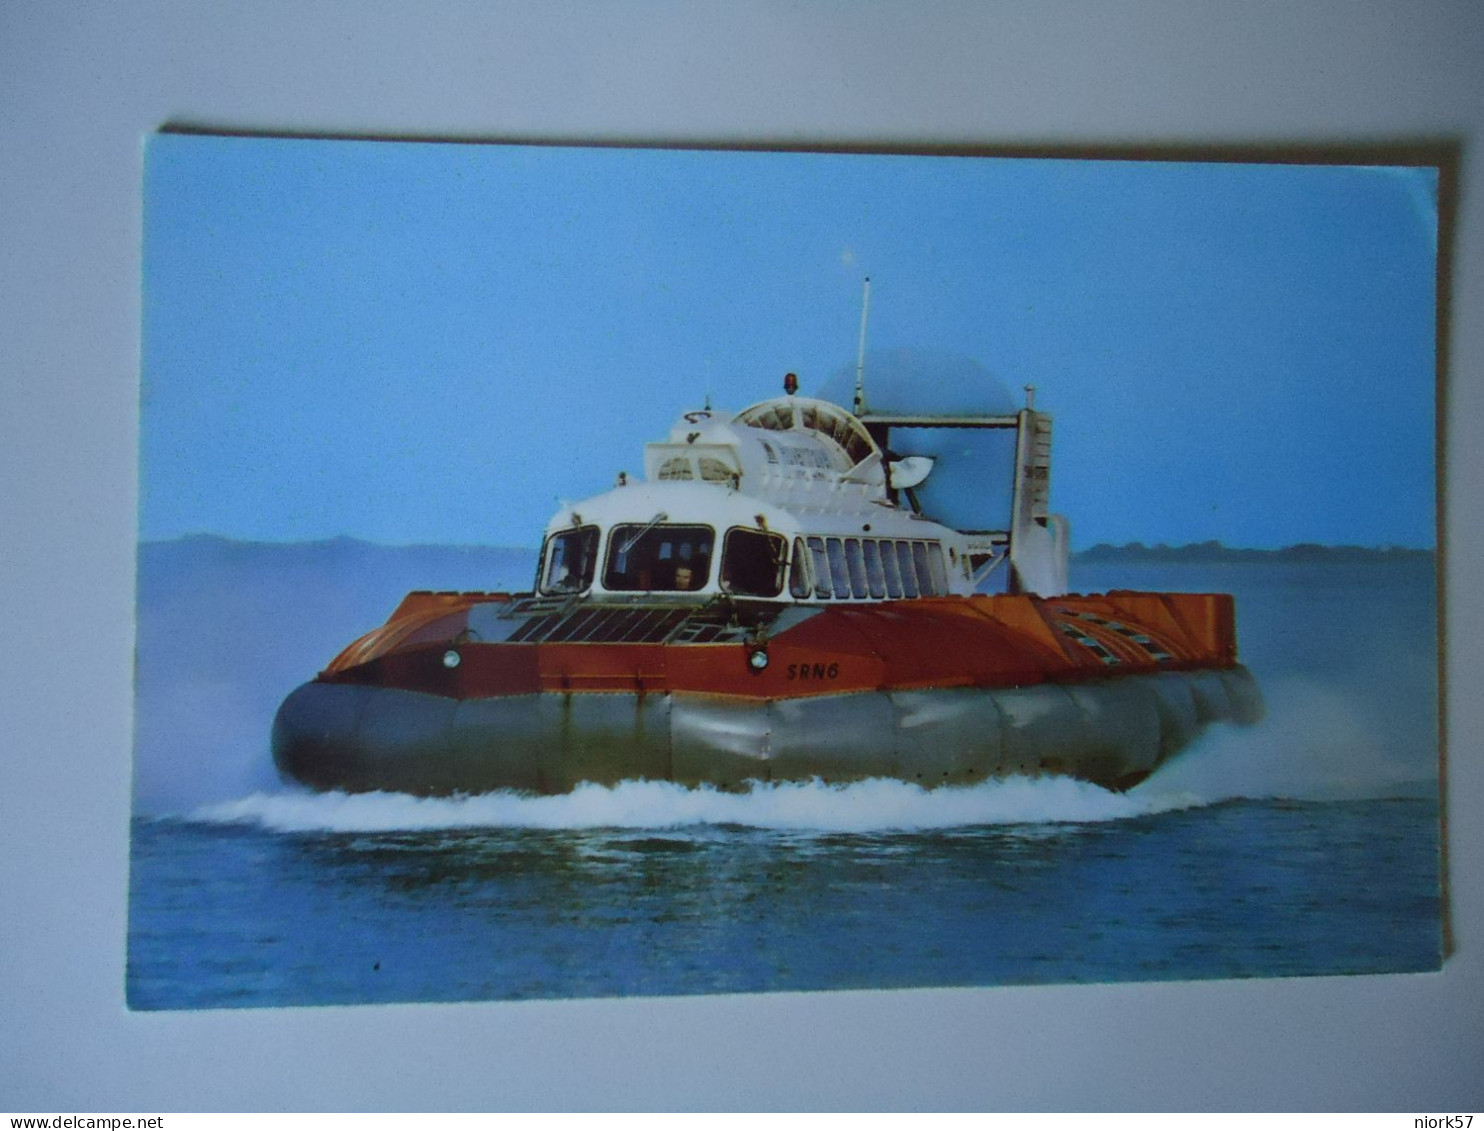 NORWAY POSTCARDS SHIPS   SRN 6 HOVERCRAFT   FOR MORE PURCHASES 10% DISCOUNT - Norvège